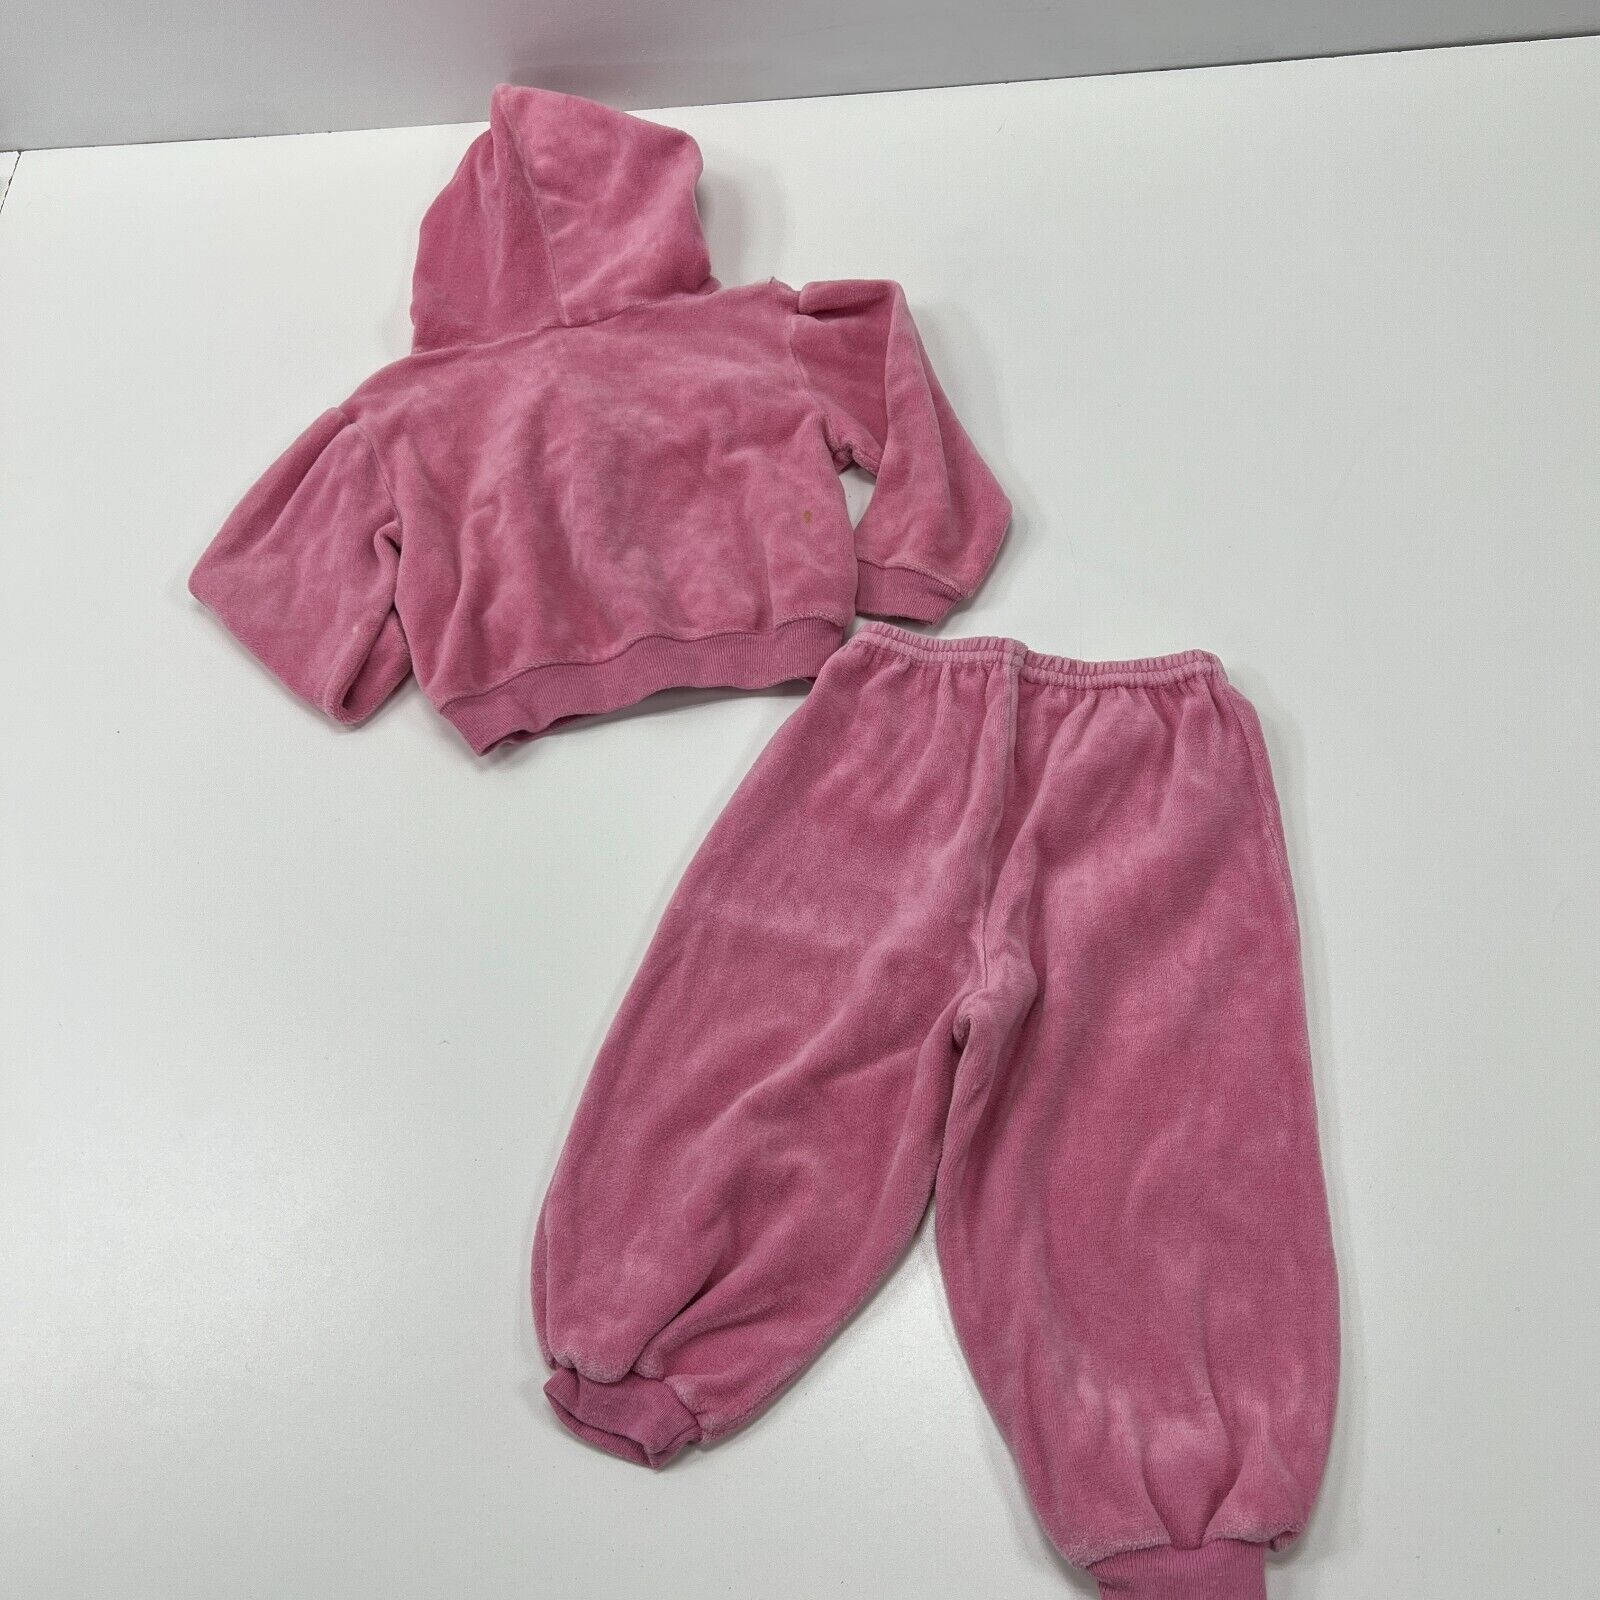 JC Penney Toddle Time Pink Velour Hooded Track Suit Size 2 Vintage 1980s